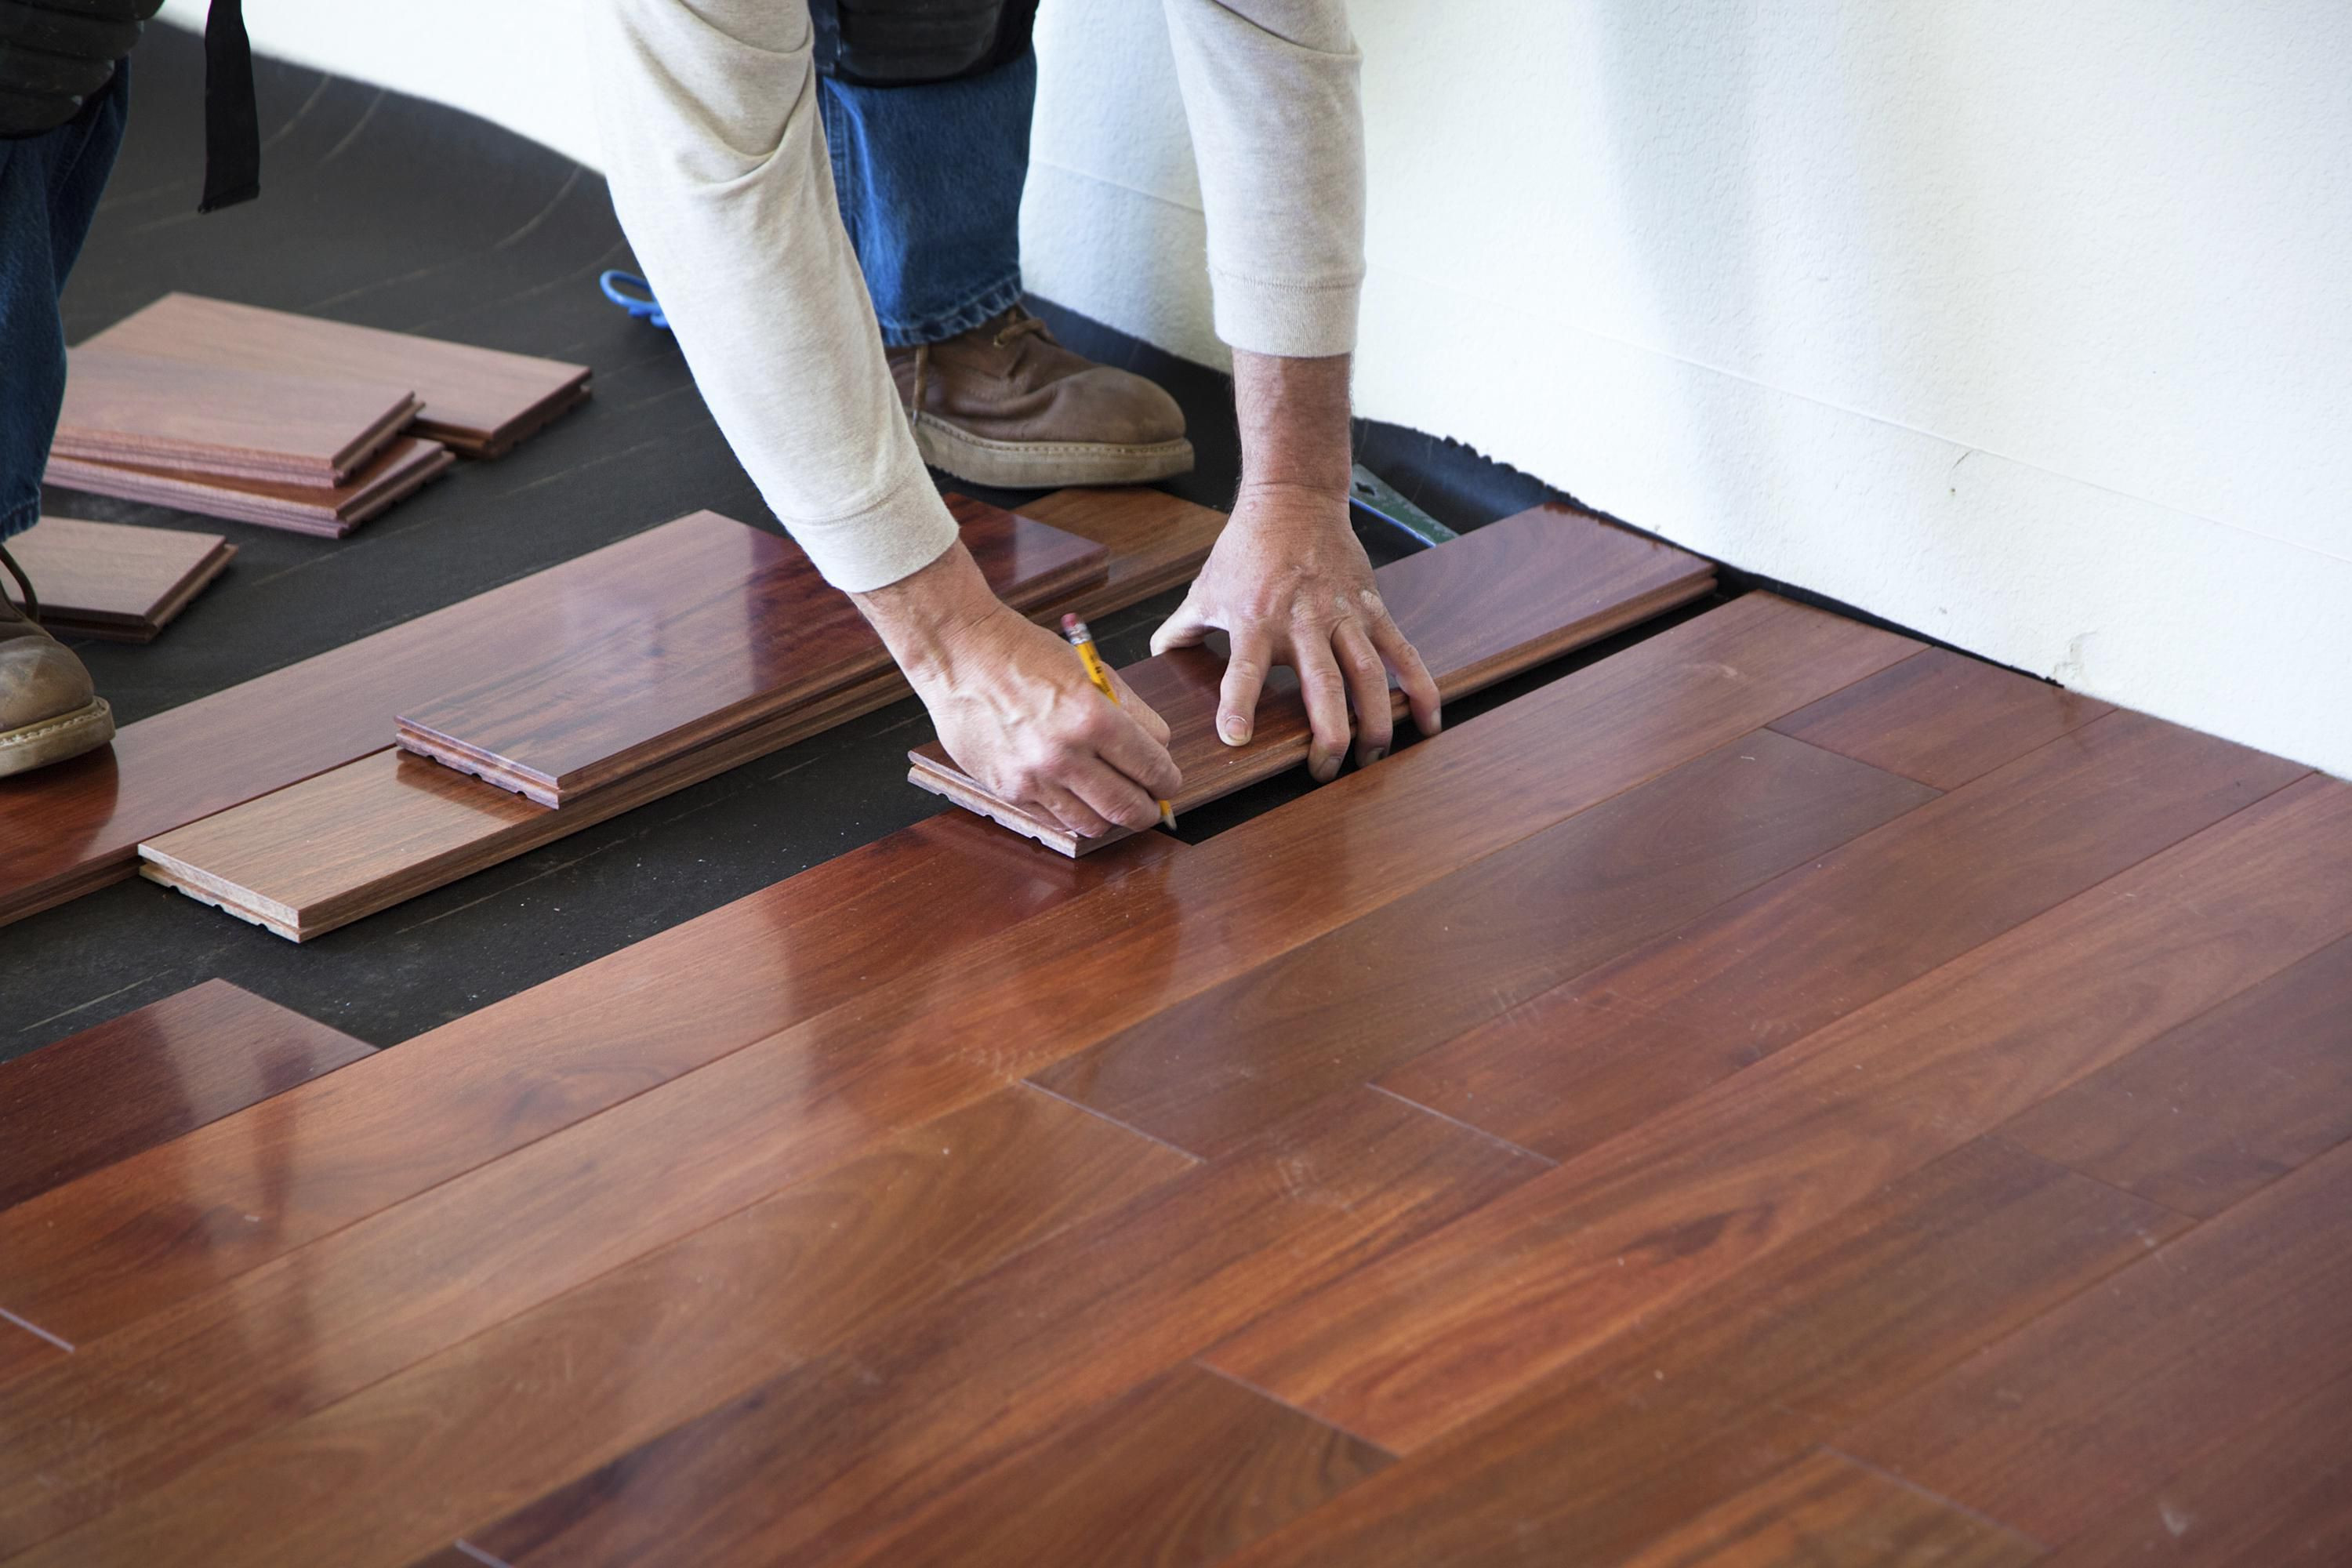 16 Lovely Price for Sanding and Refinishing Hardwood Floors 2022 free download price for sanding and refinishing hardwood floors of this is how much hardwood flooring to order in 170040982 56a49f213df78cf772834e21